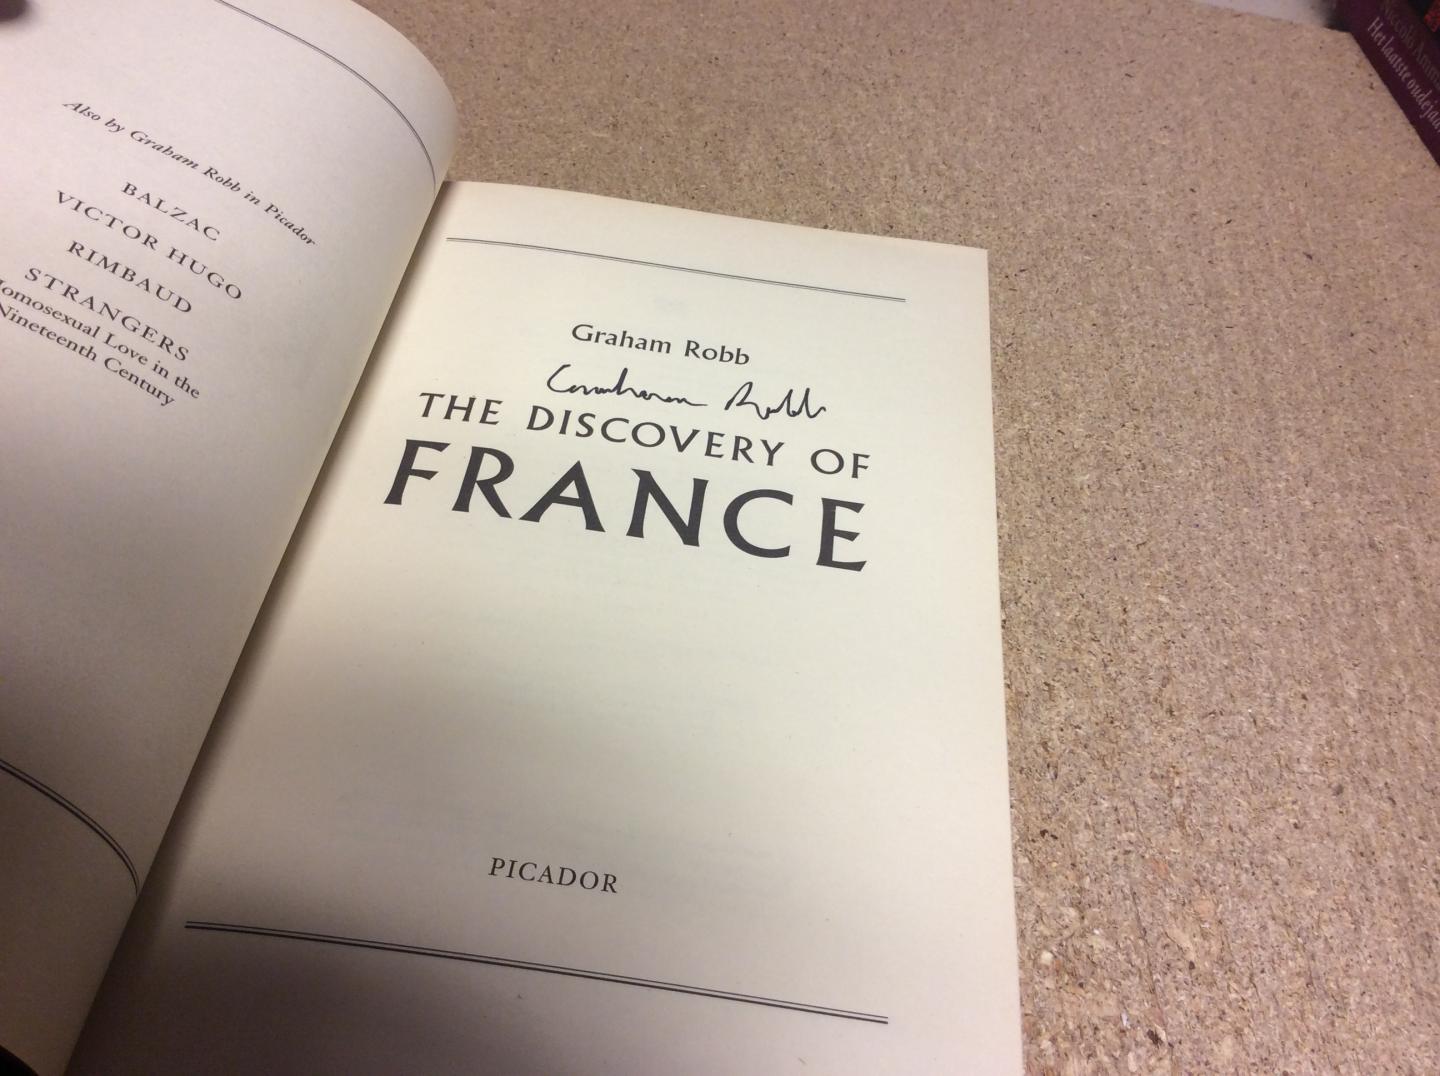 Robb, Graham - The Discovery of France SIGNED BY GRAHAM ROBB